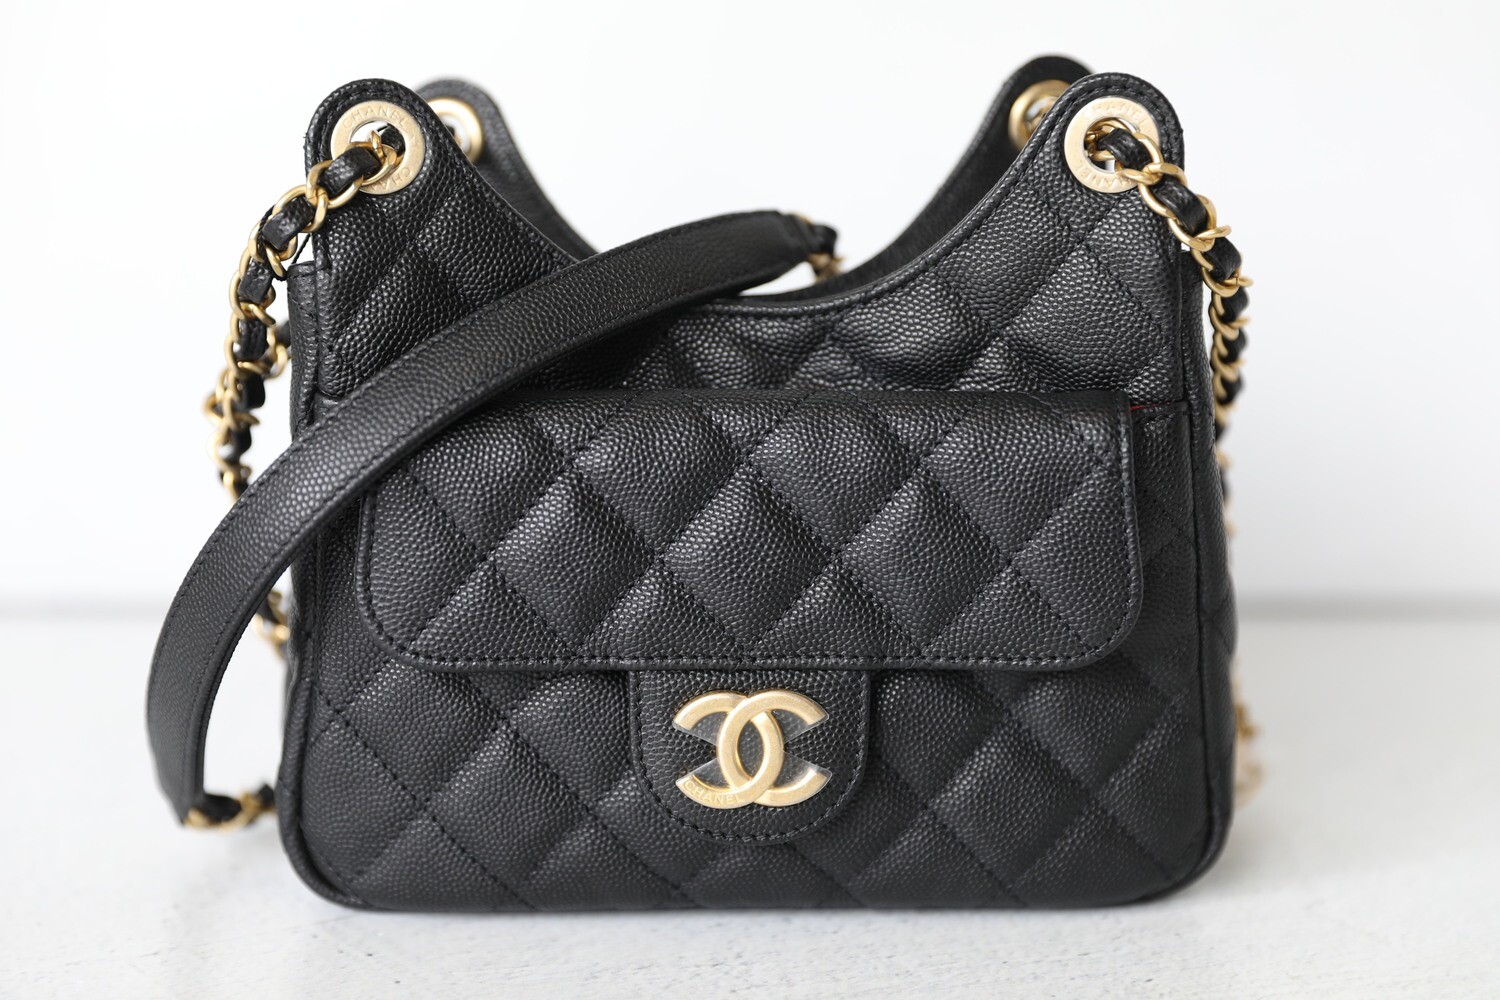 Chanel Hobo Bag Small, Black Caviar Leather with Gold Hardware, New in Box  WA001